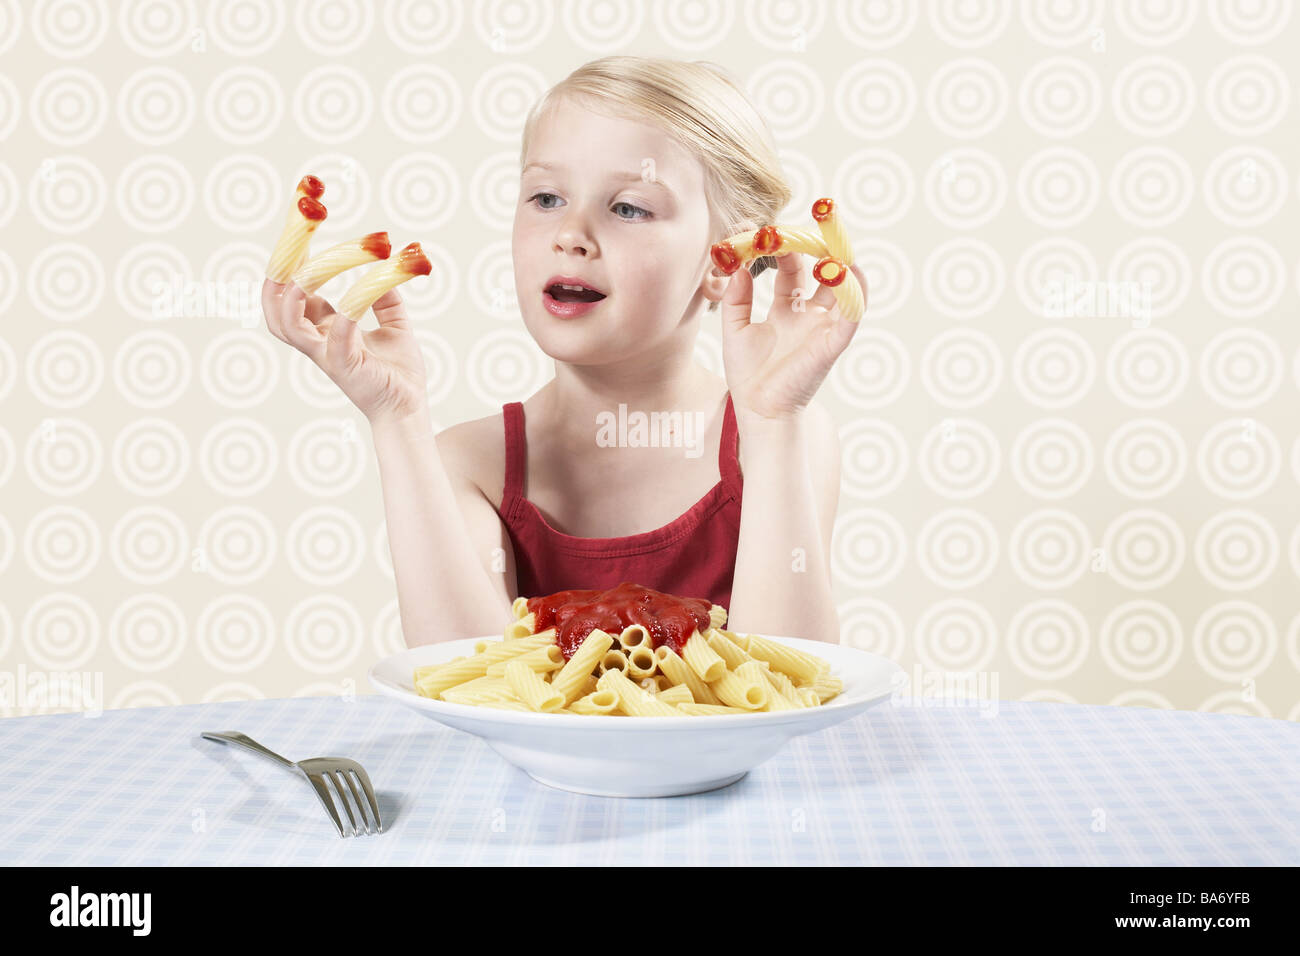 Girls fingers noodles 'Rigatoni' given up tops ketchup semi-portrait dunked people child child-portrait childhood 5-6 years Stock Photo